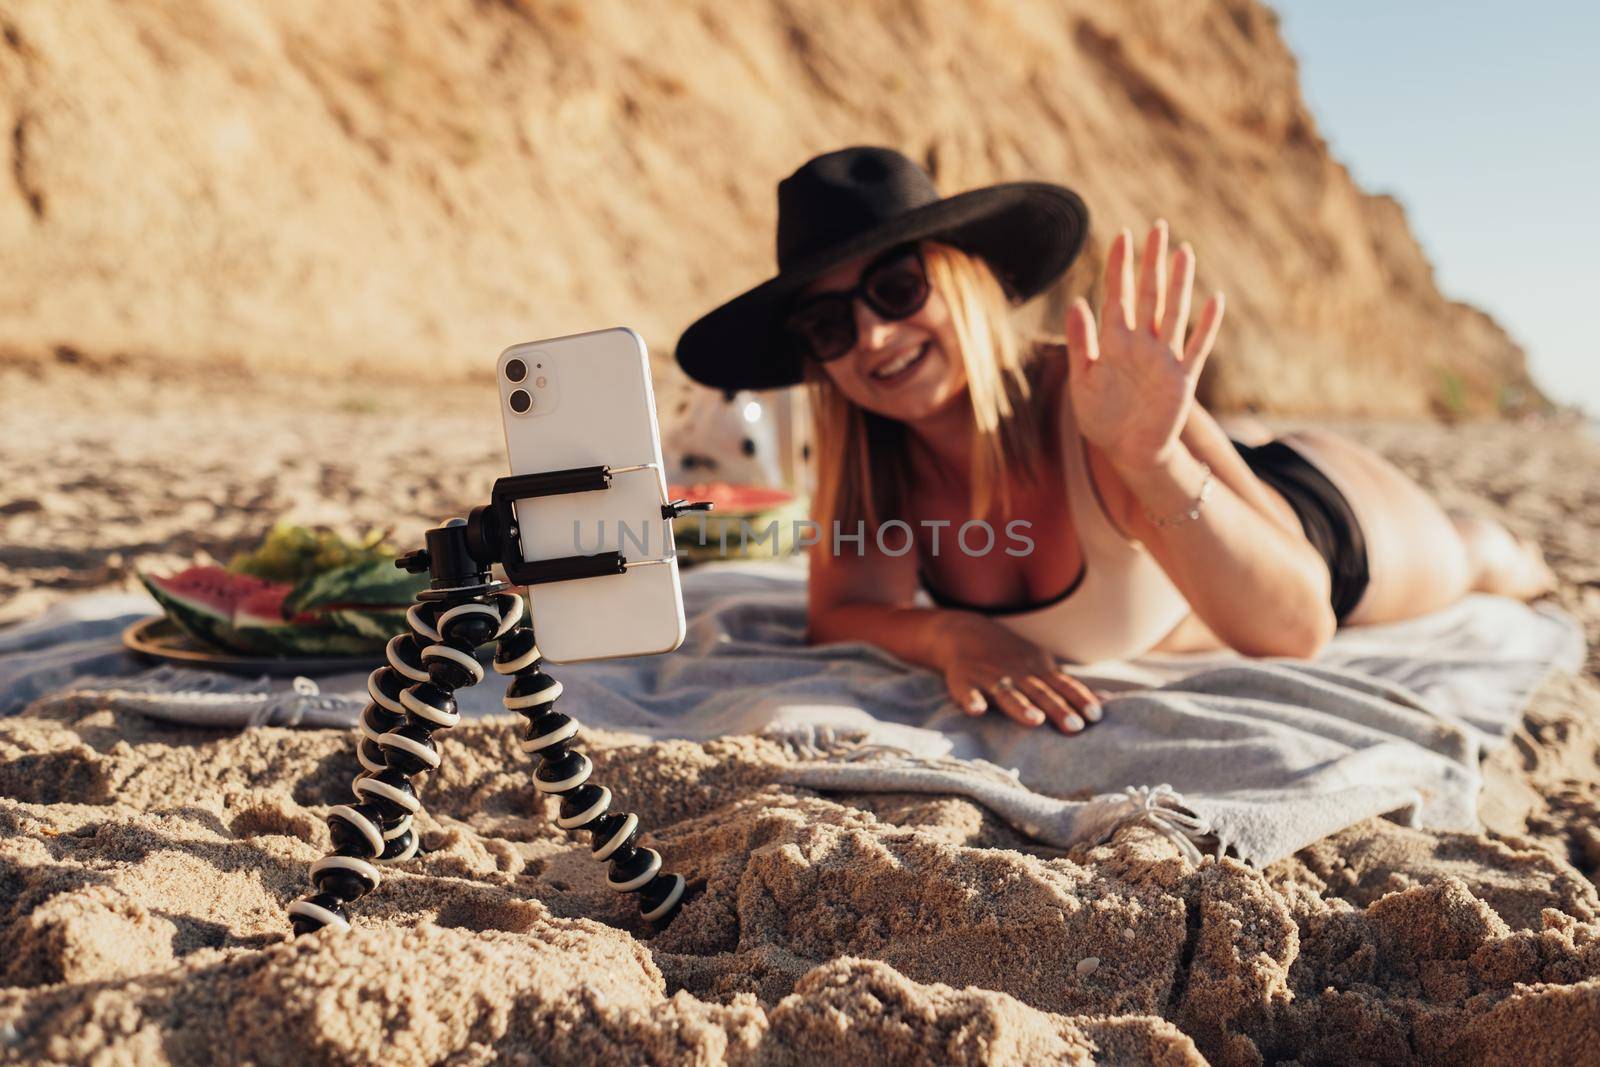 Smartphone Attached on Tripod in Focus, Young Woman Filming Herself on Mobile Camera While Enjoying Vacation by Sea